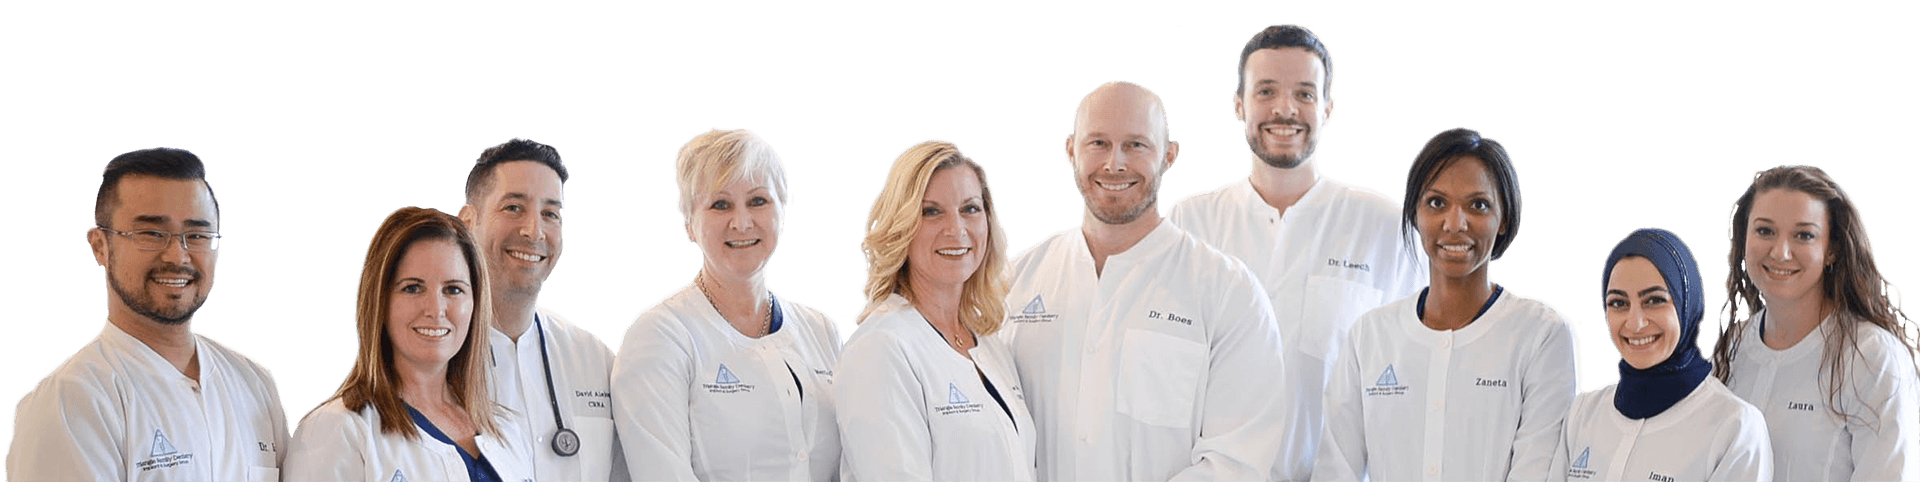 Sedation Dentistry - Triangle Family Dentistry Implant & Surgery Group